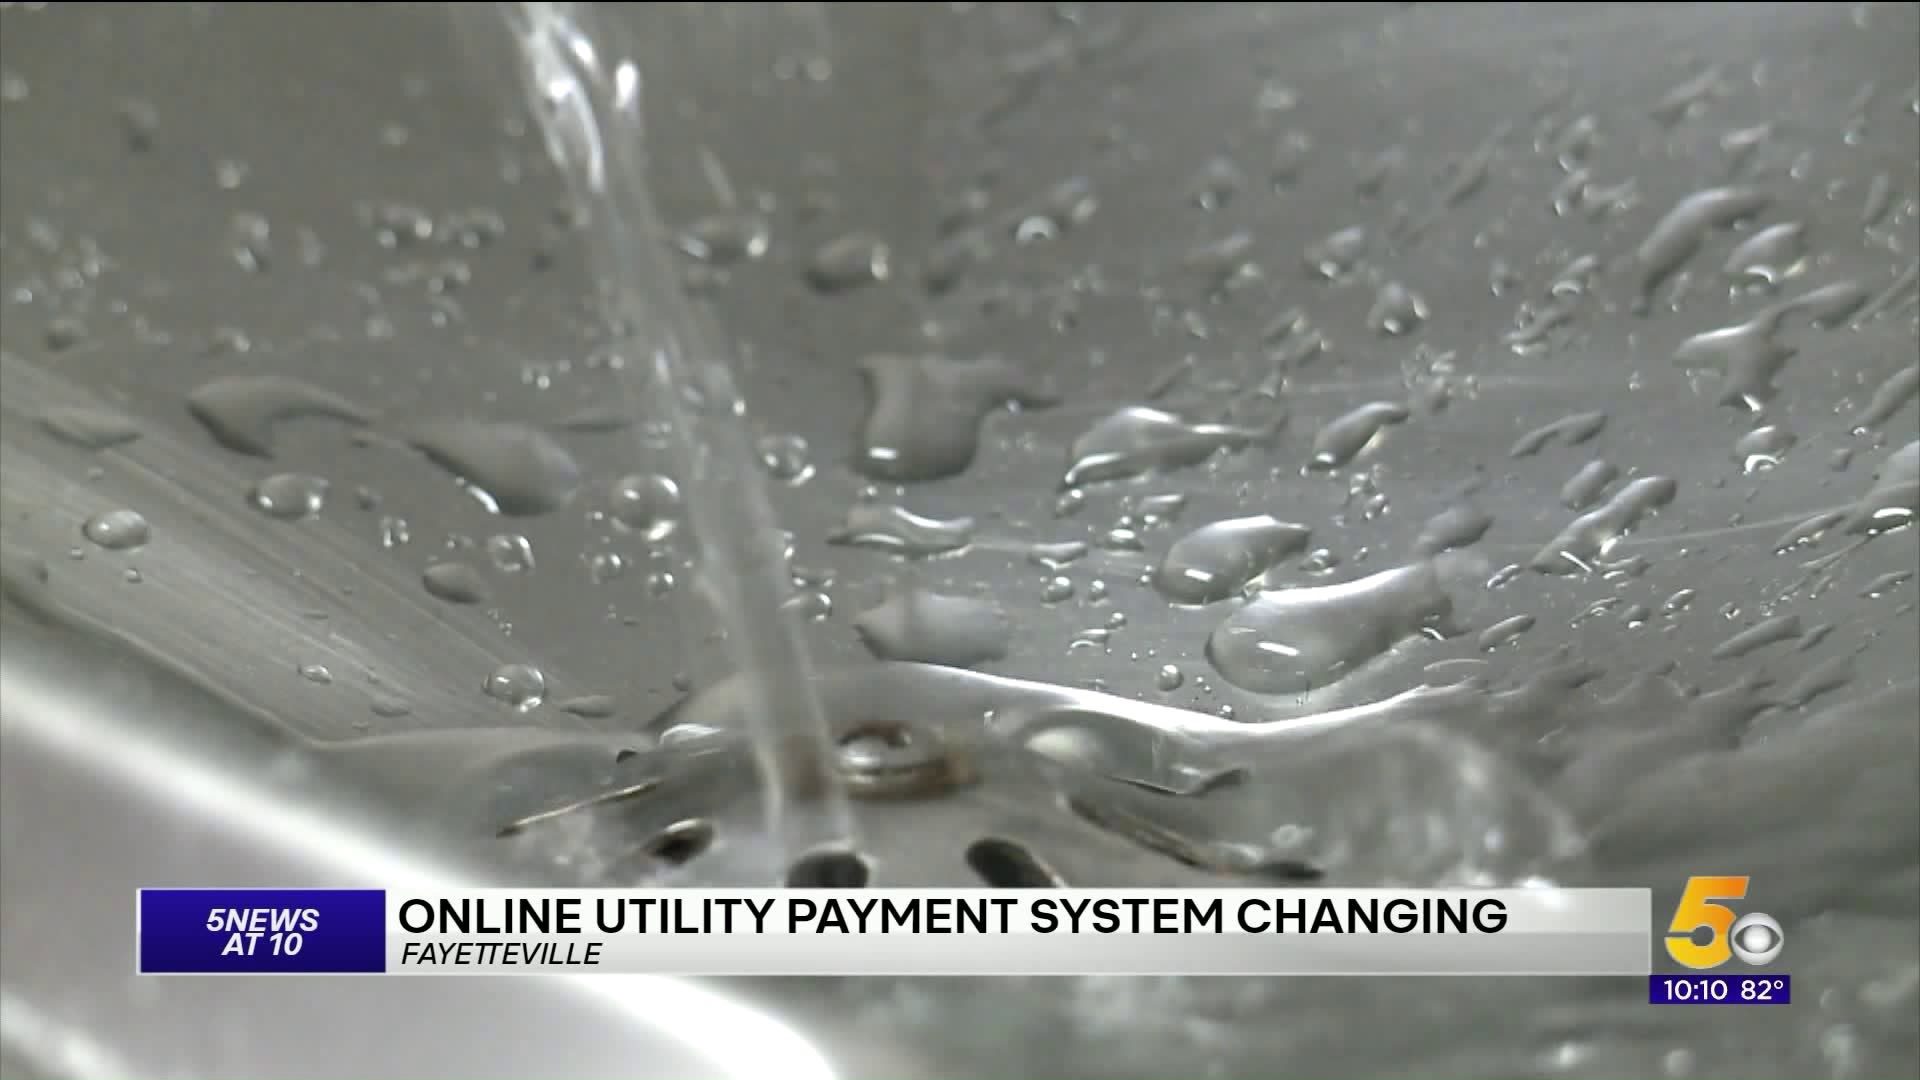 Fayetteville Online Utility Payment System Changing